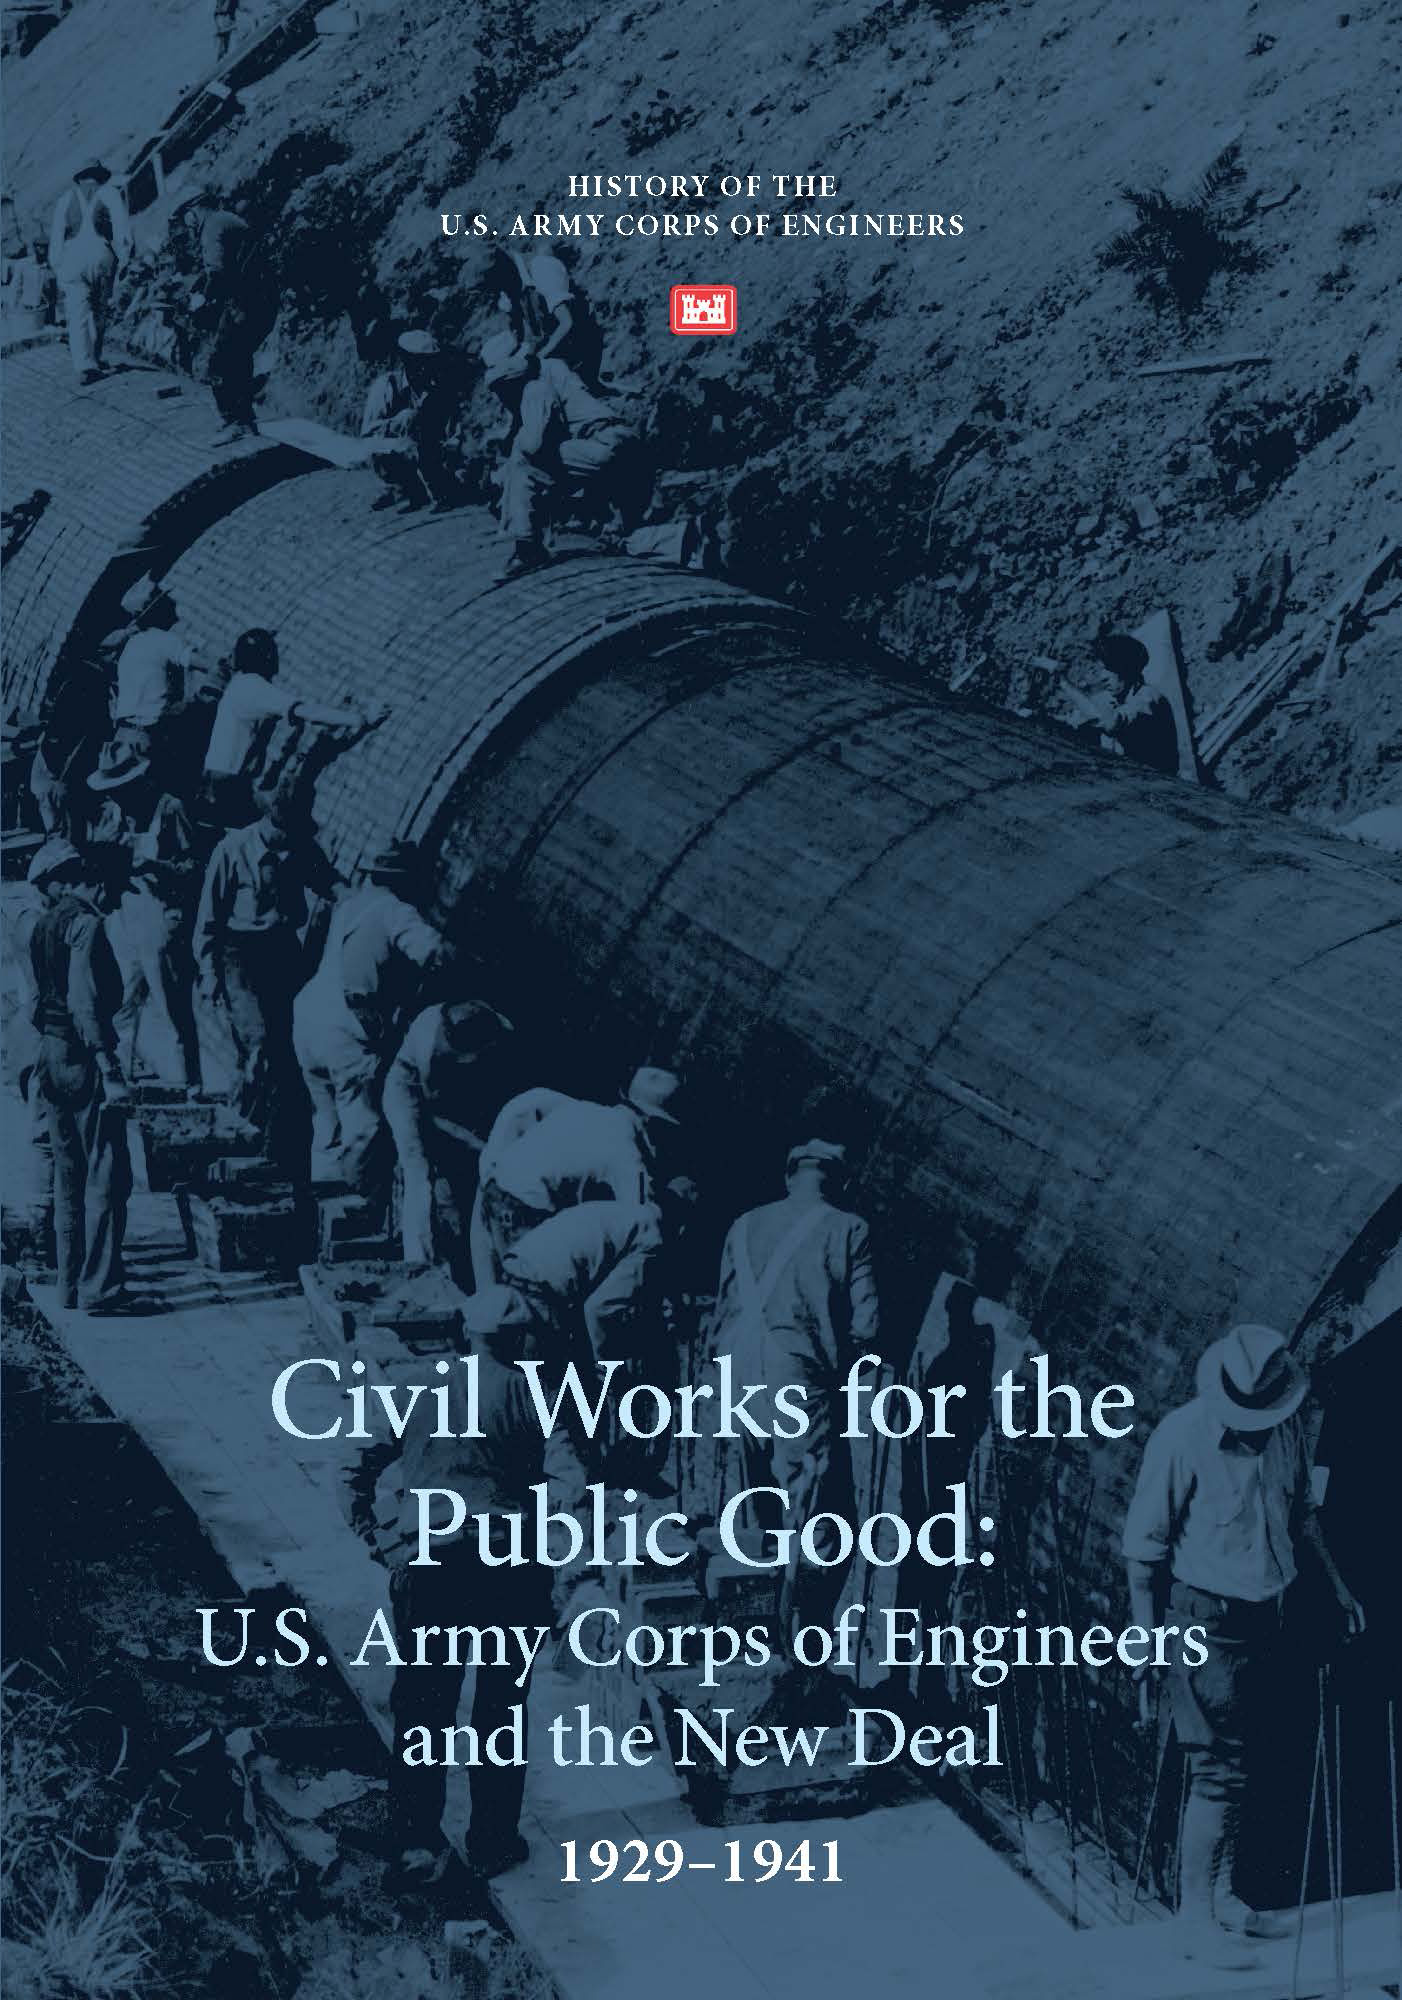 Book cover with photo of men working in spillway and the book title